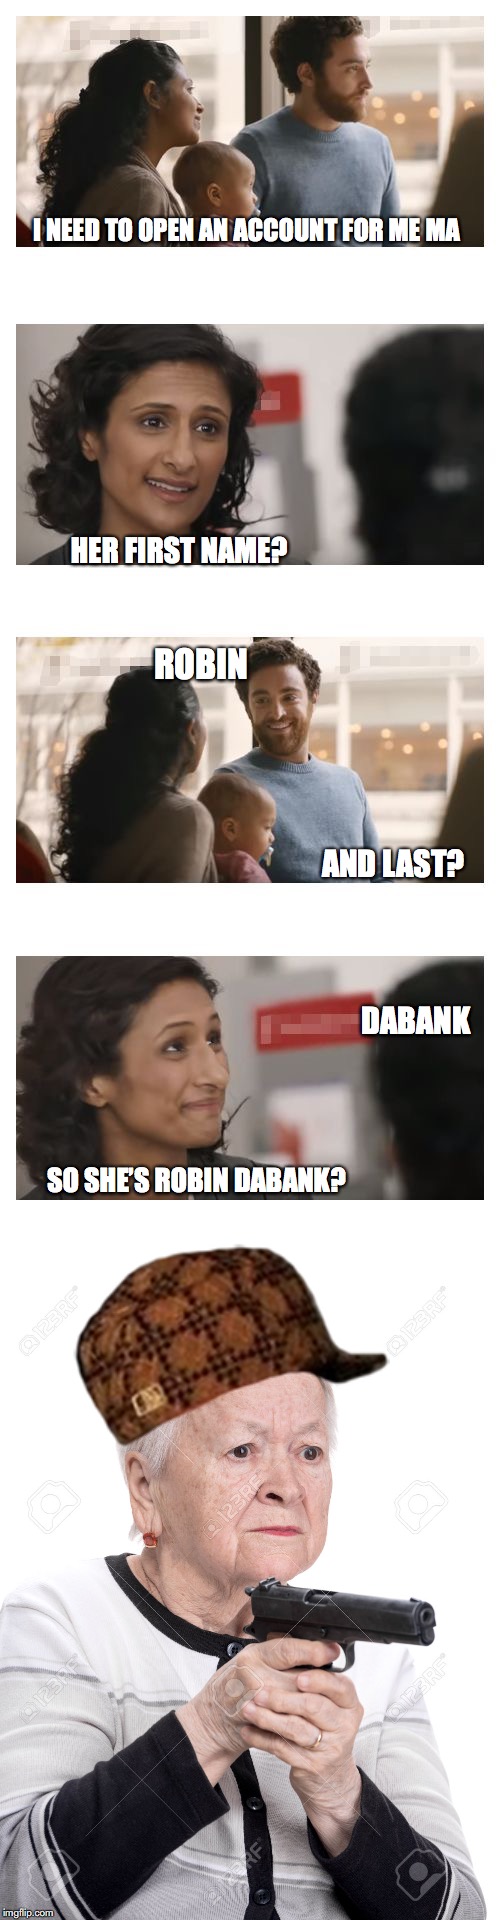 When social security isn’t enough | I NEED TO OPEN AN ACCOUNT FOR ME MA; HER FIRST NAME? ROBIN; AND LAST? DABANK; SO SHE’S ROBIN DABANK? | image tagged in old people,bank robber,welfare,social security | made w/ Imgflip meme maker